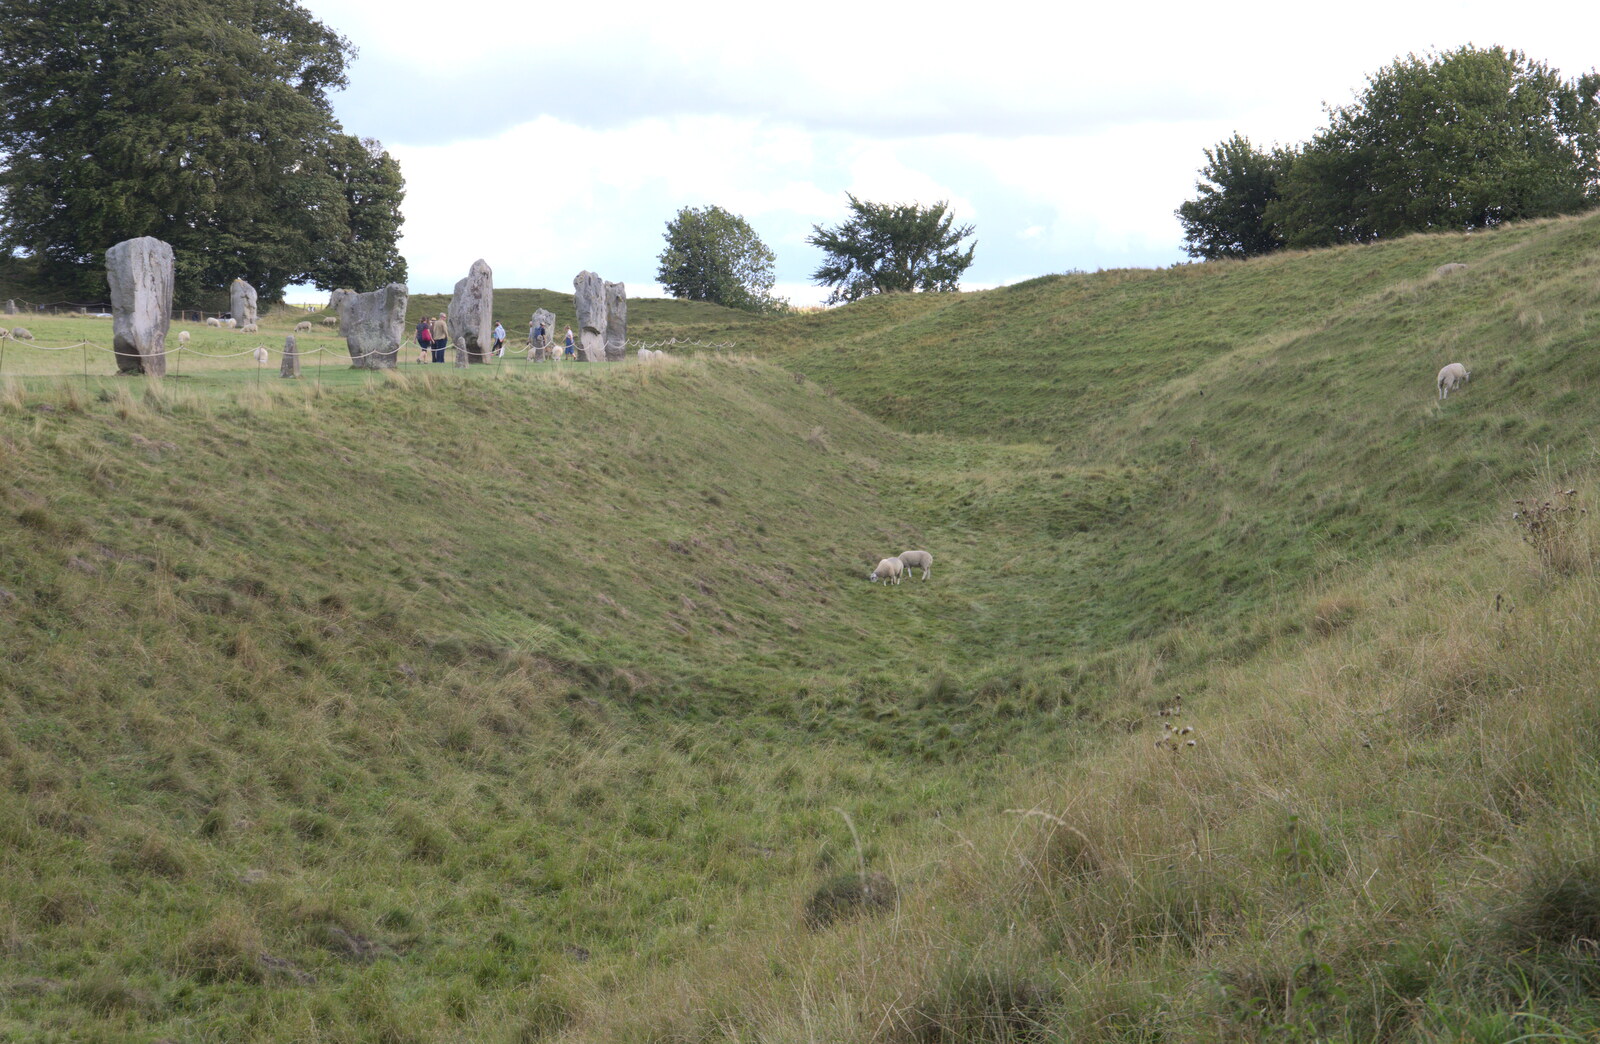 The deep ditch around the stone circle from Stone Circles: Stonehenge and Avebury, Wiltshire - 22nd August 2020